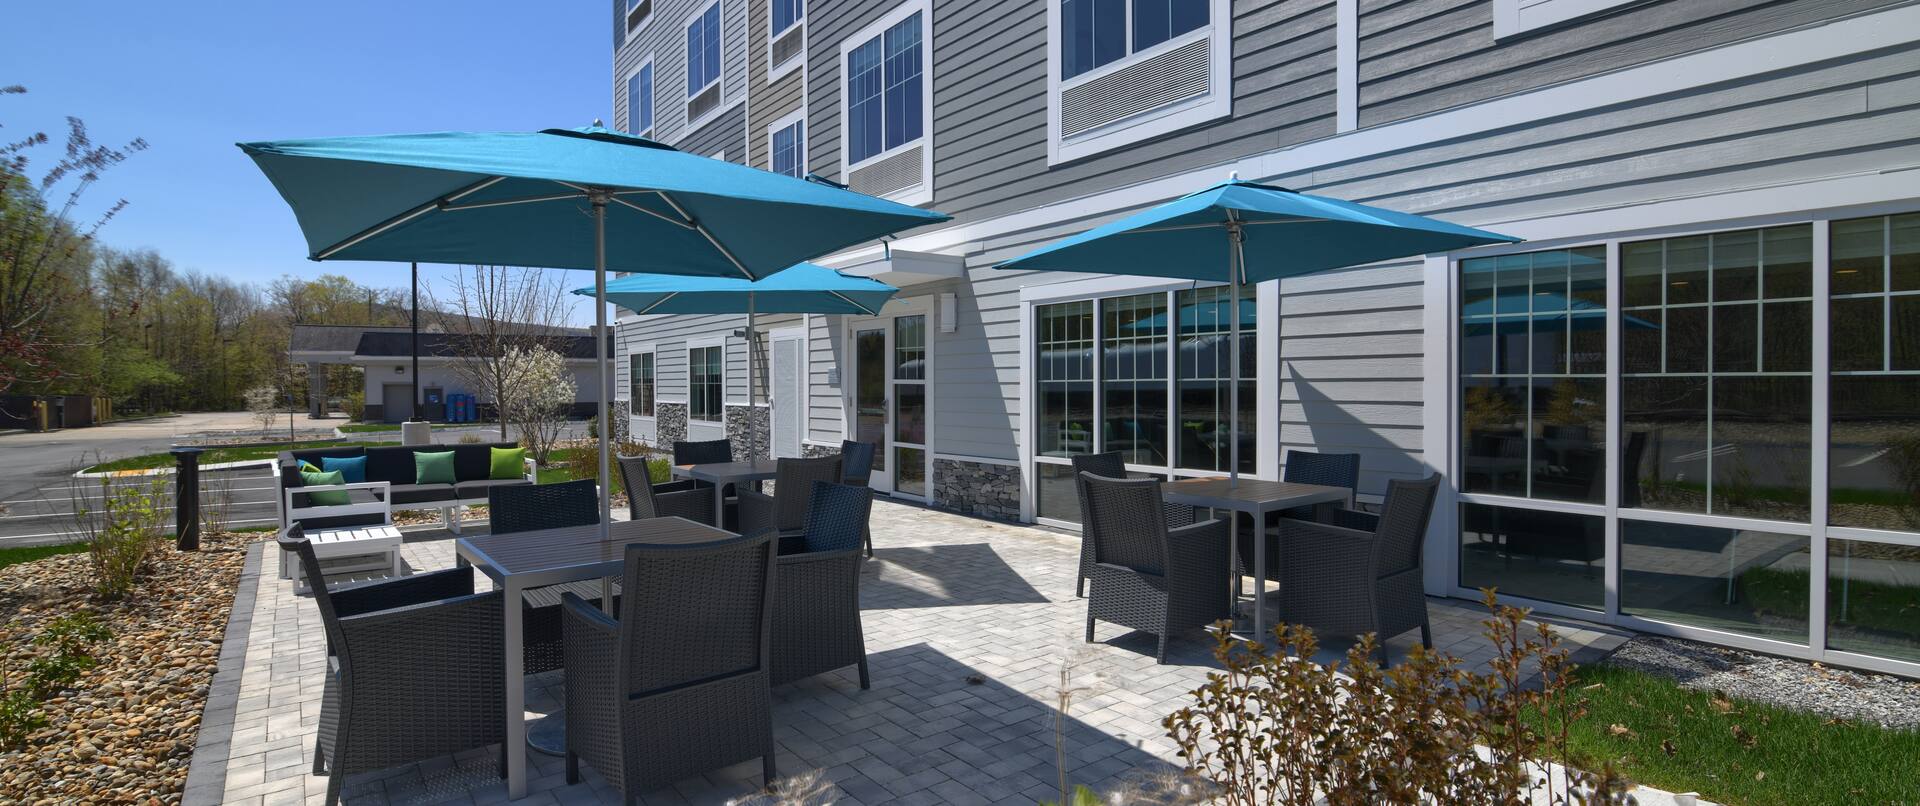 Exterior Patio with Tables and Chairs under Umbrellas